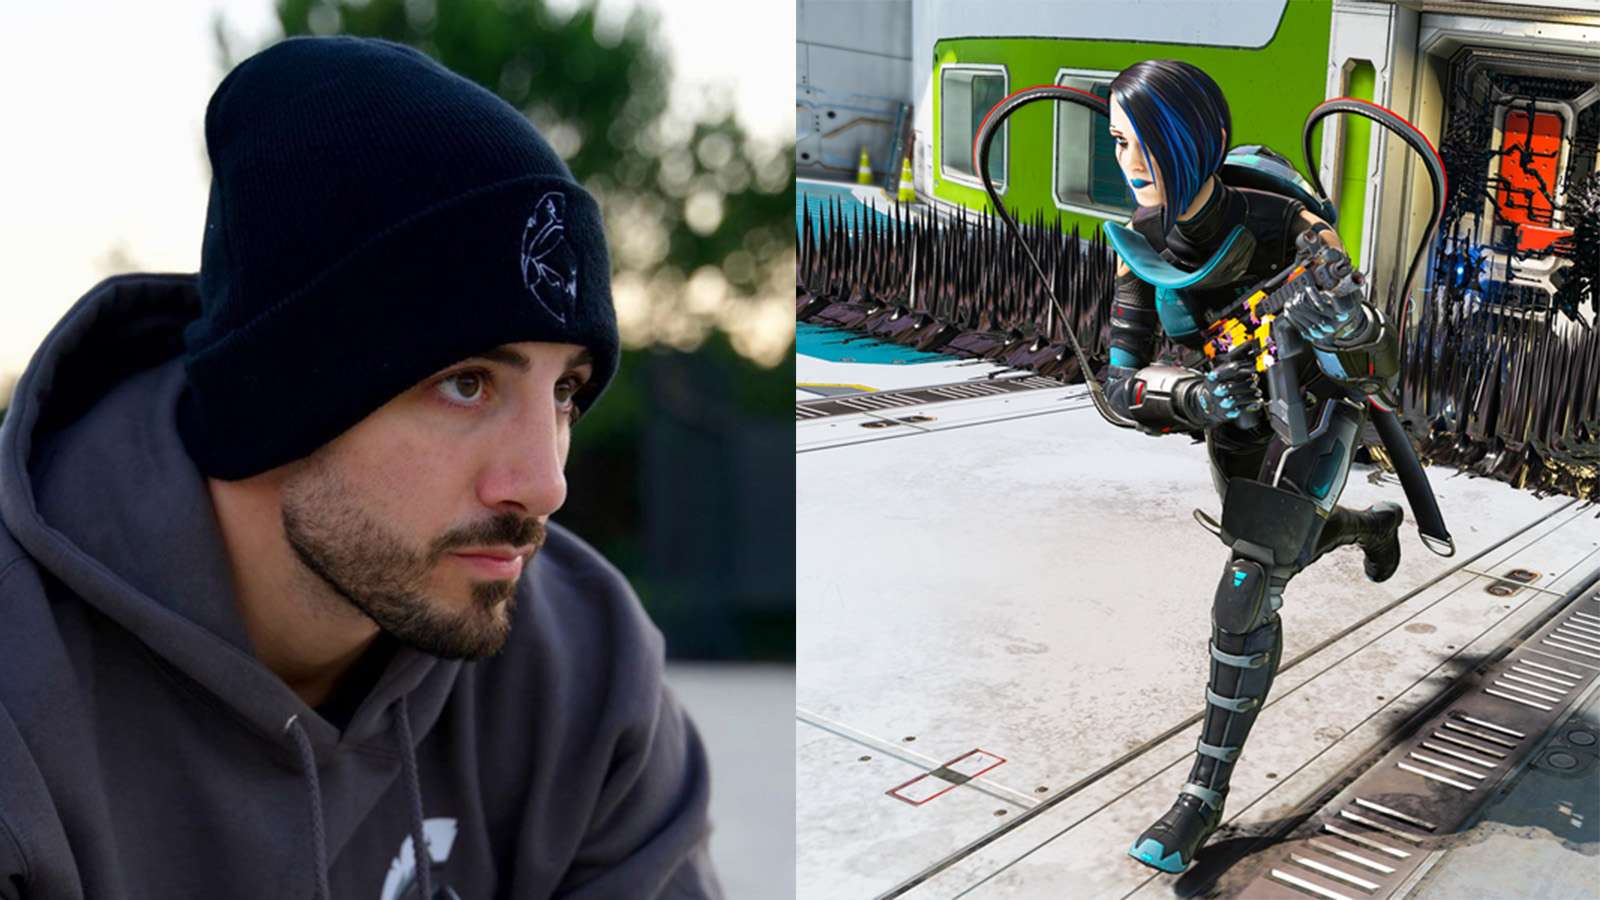 NICKMERCS in MFAM clothing next to Catalyst from Apex Legends